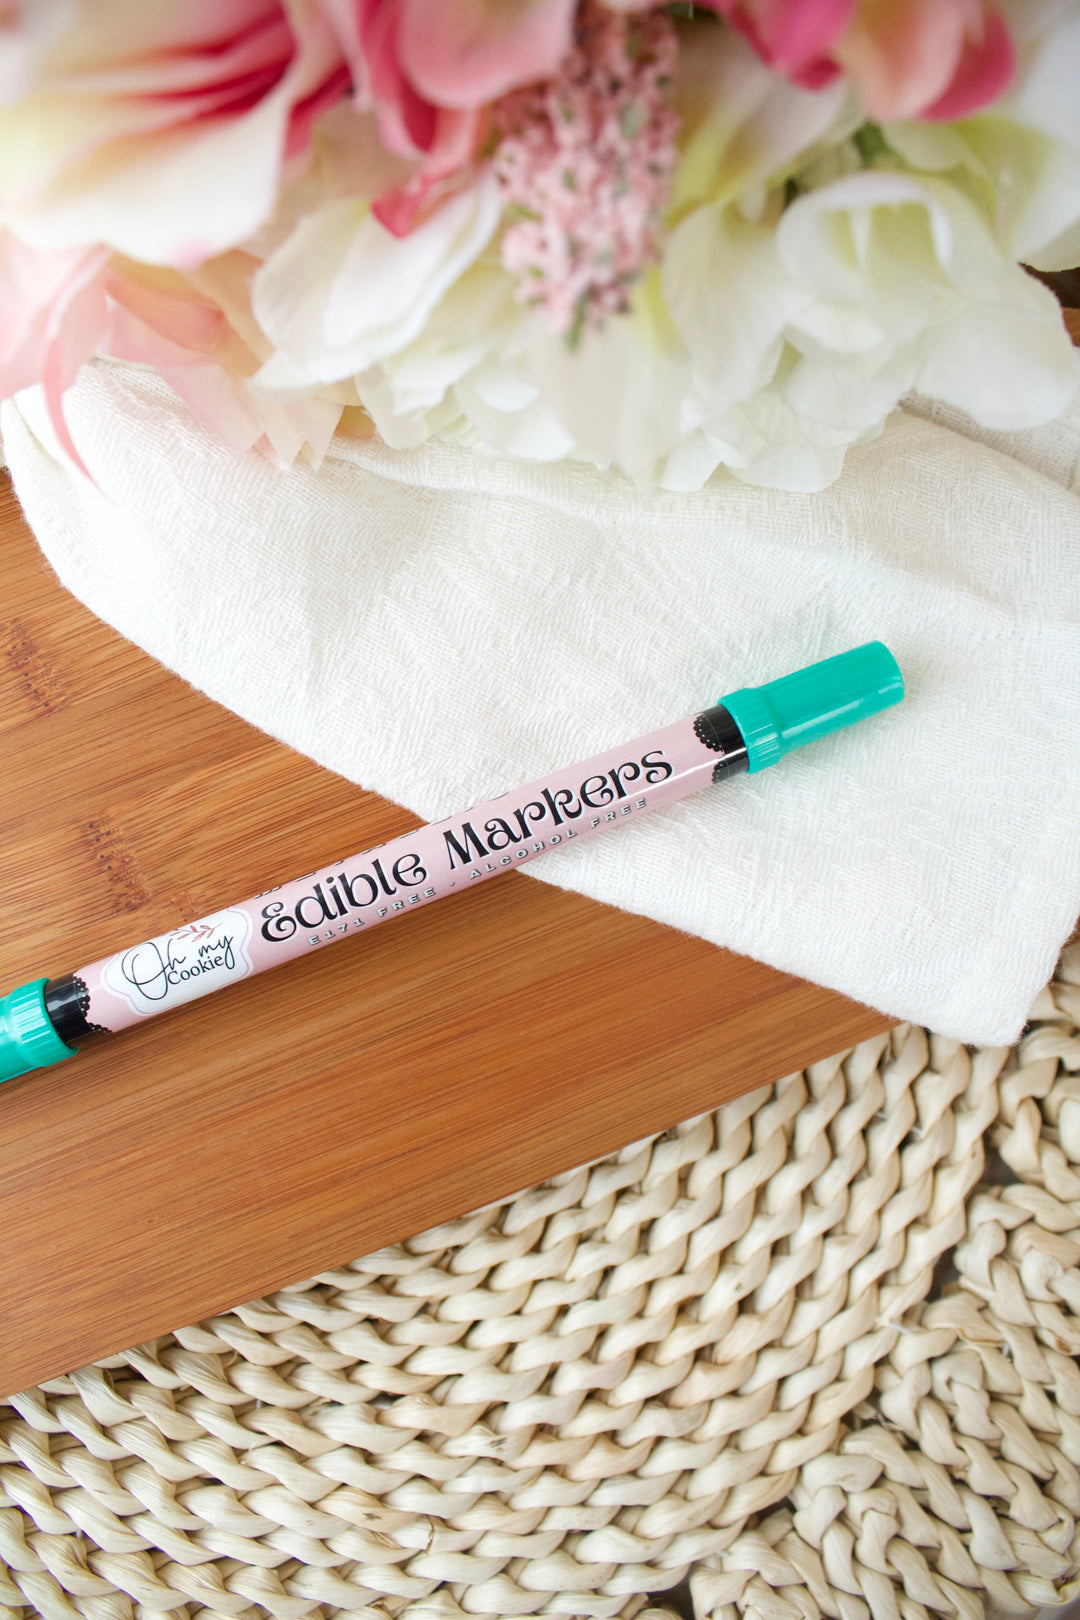 Edible markers - Turquoise